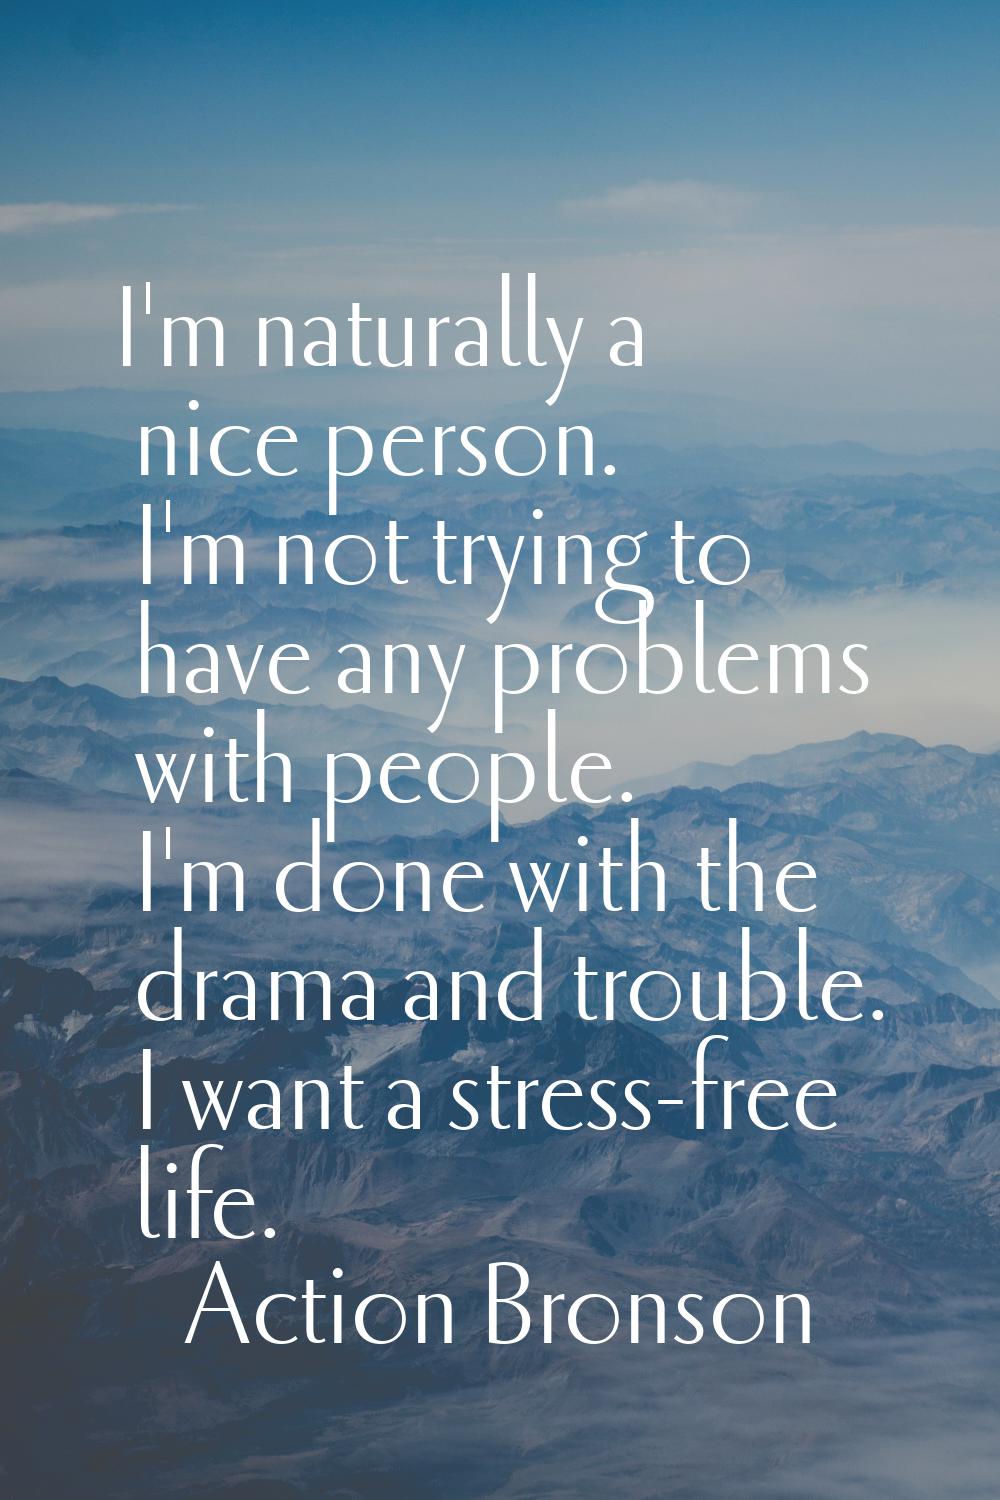 I'm naturally a nice person. I'm not trying to have any problems with people. I'm done with the dra